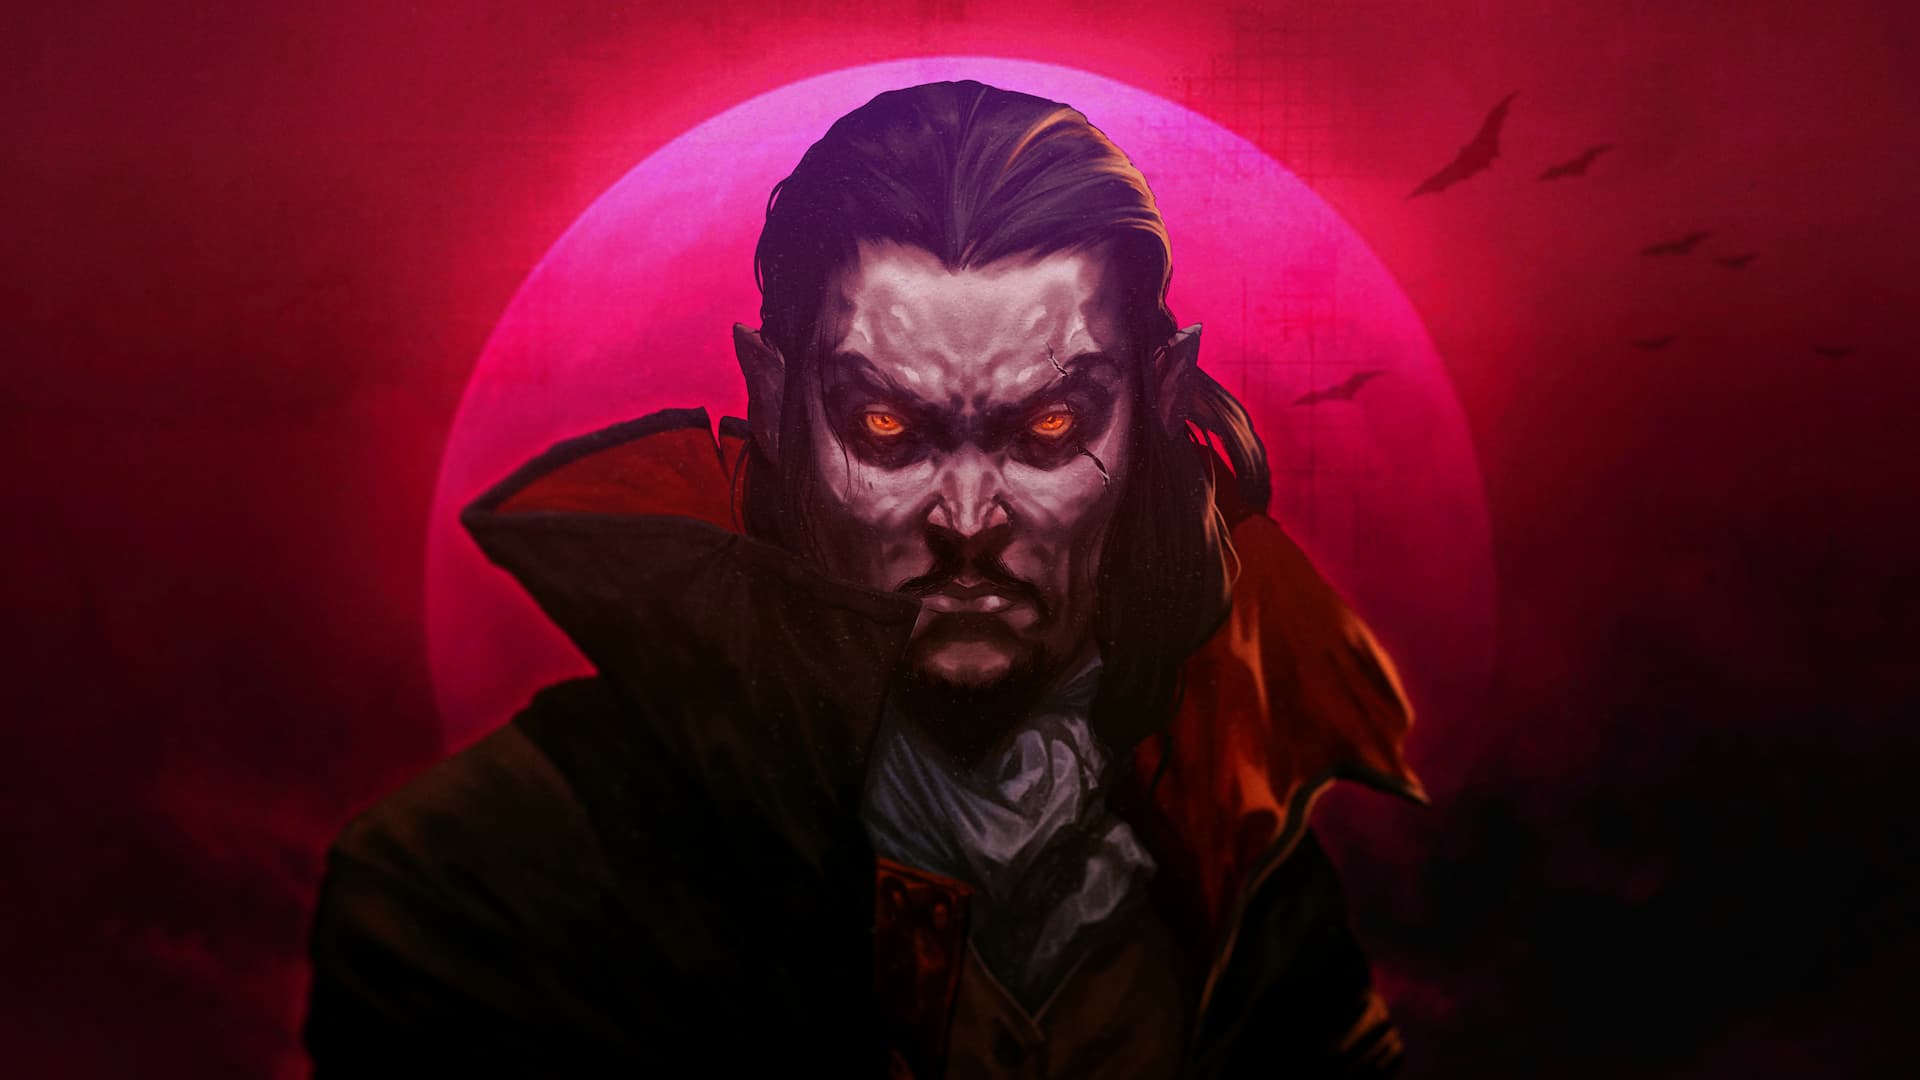 Mobile version of Vampire Survivors reaches 1m downloads in a week